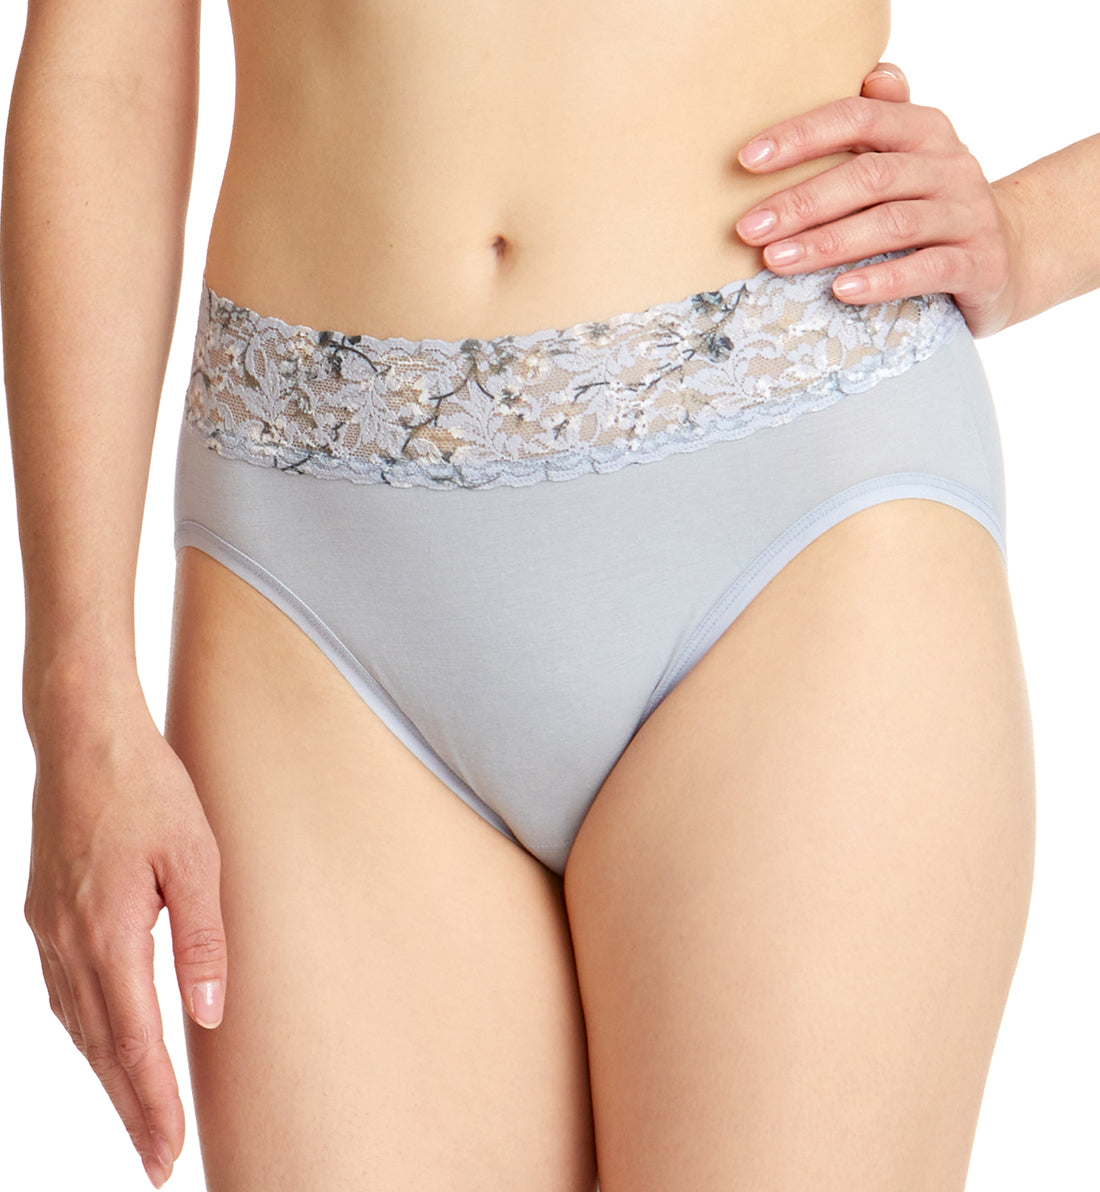 Hanky Panky Cotton-Spandex French Brief (892441),Small,Dove Grey/Misty Meadow - Dove Grey/Misty Meadow,Small